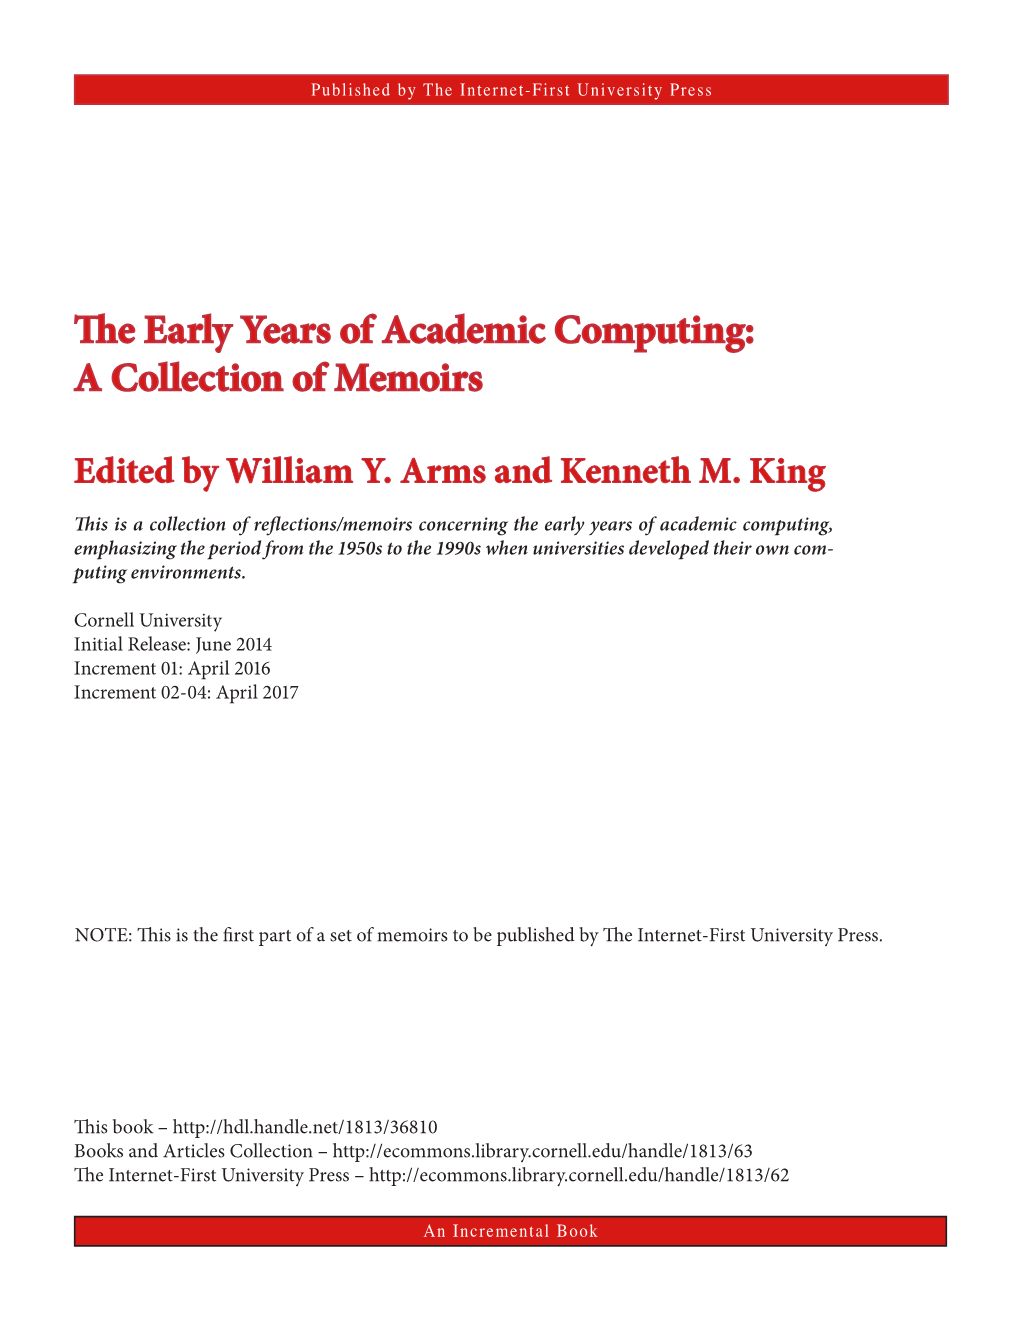 The Early Years of Academic Computing: a Collection of Memoirs